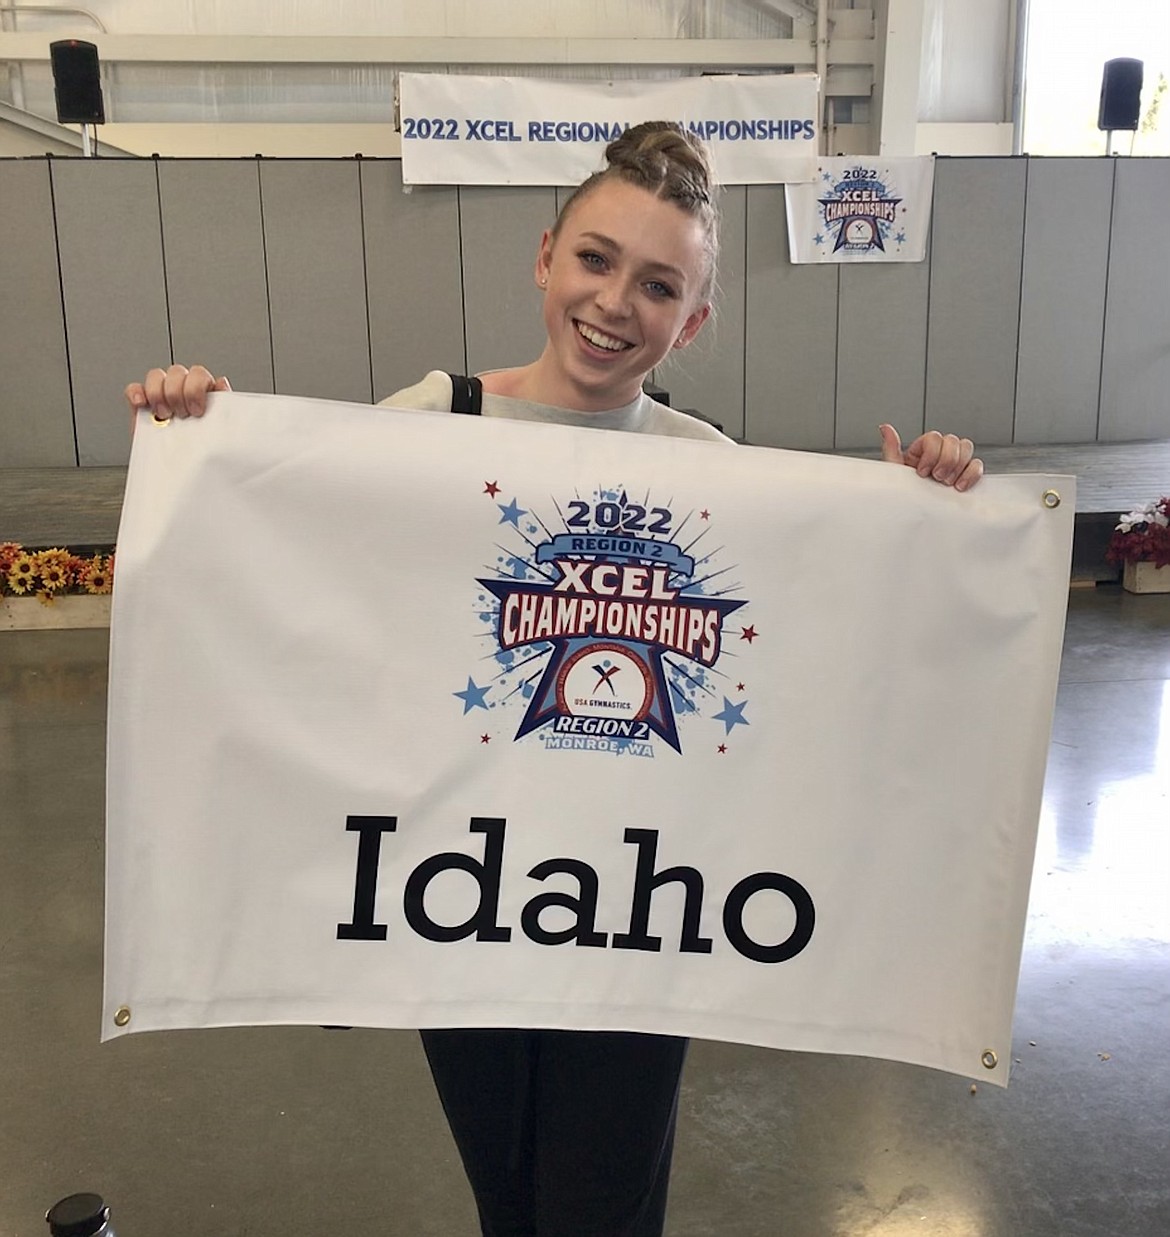 Courtesy photo
North Idaho Gymnastics Taryn Olson took fifth place All Around at the 2022 Region 2 Xcel Gymnastics Championships May 1 in Monroe, Wash., and qualified for nationals in Daytona Beach, Fla.